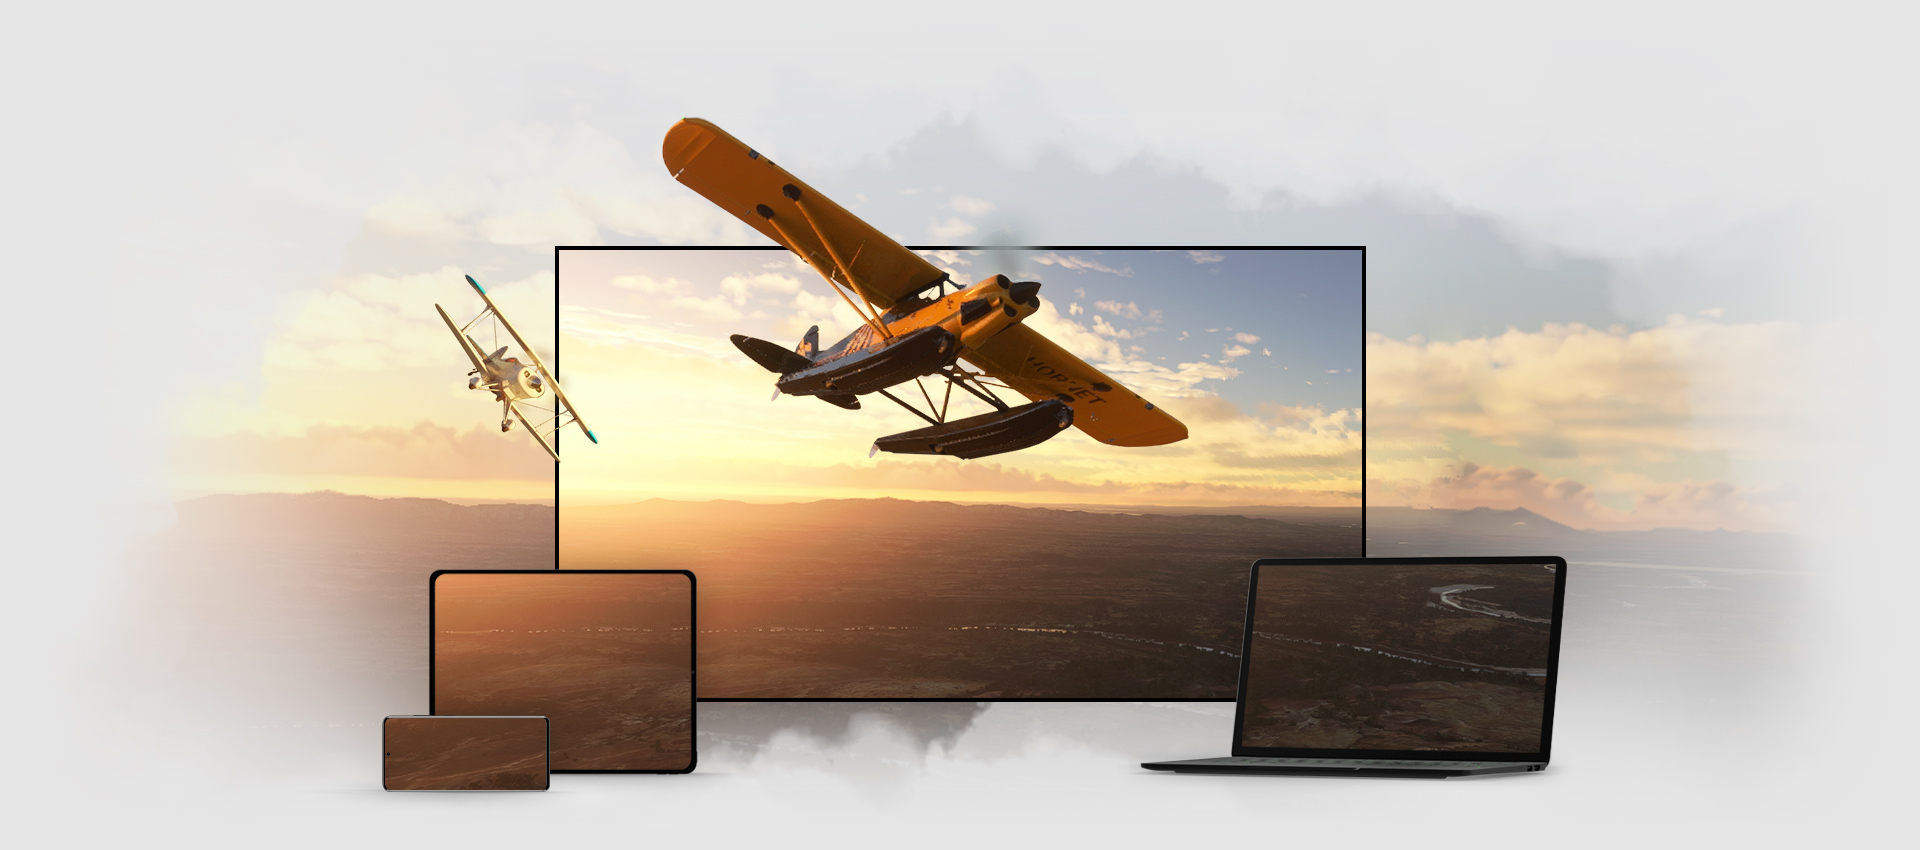 Microsoft Flight Simulator gameplay appears across multiple device screens, including laptop, TV, phone, and tablet.